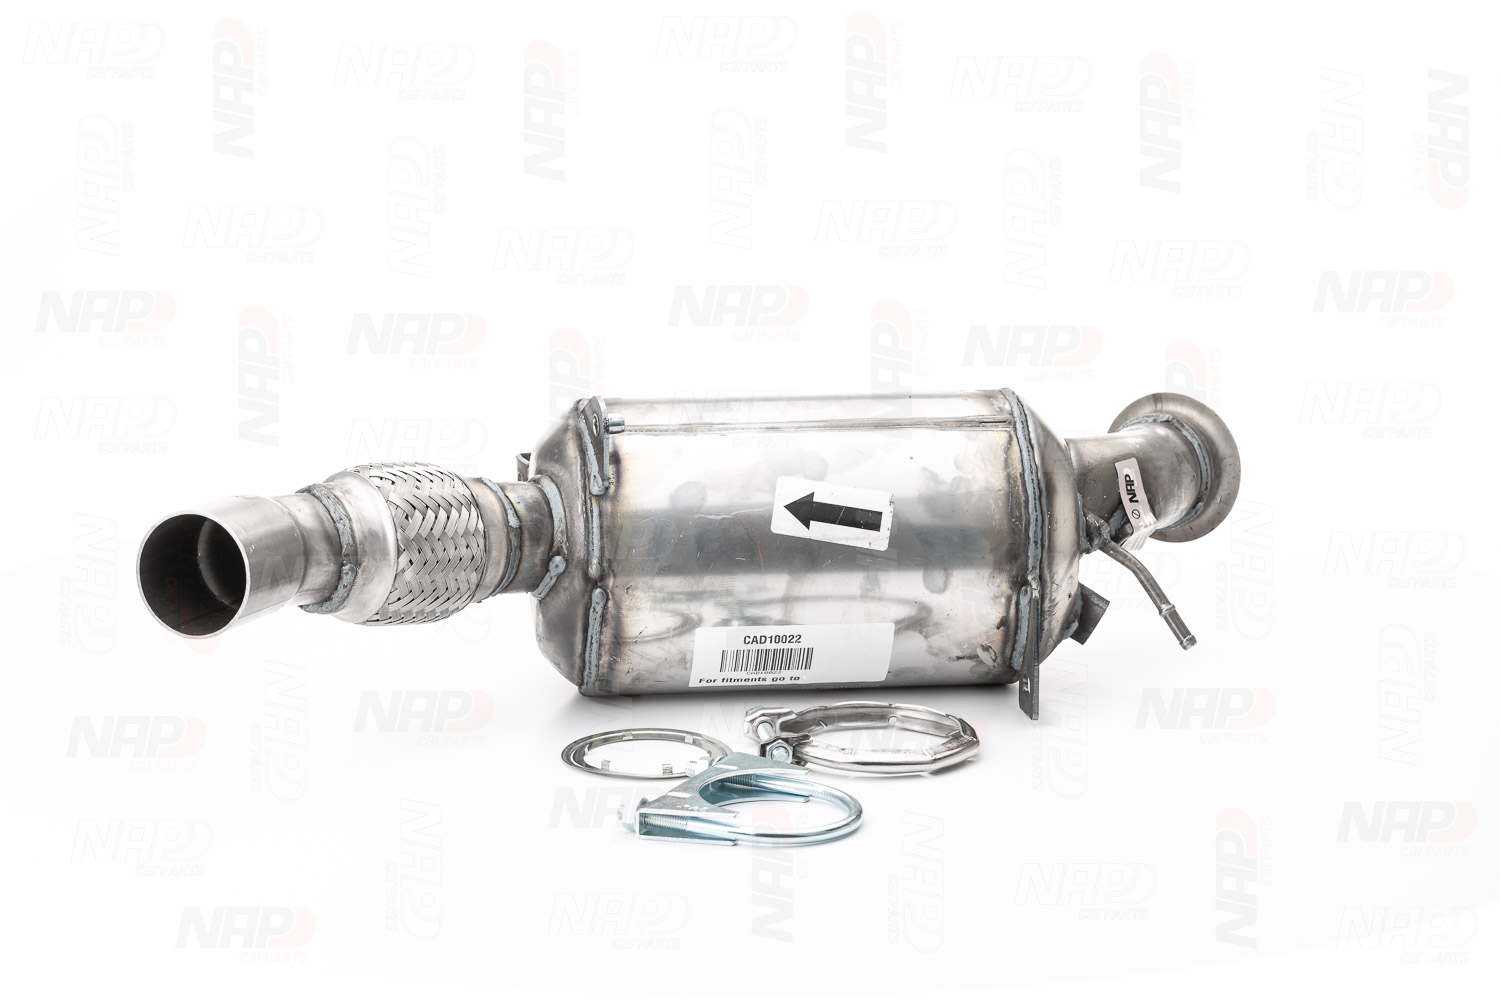 NAP carparts CAD10022 Diesel particulate filter Euro 4 (D4), with attachment material